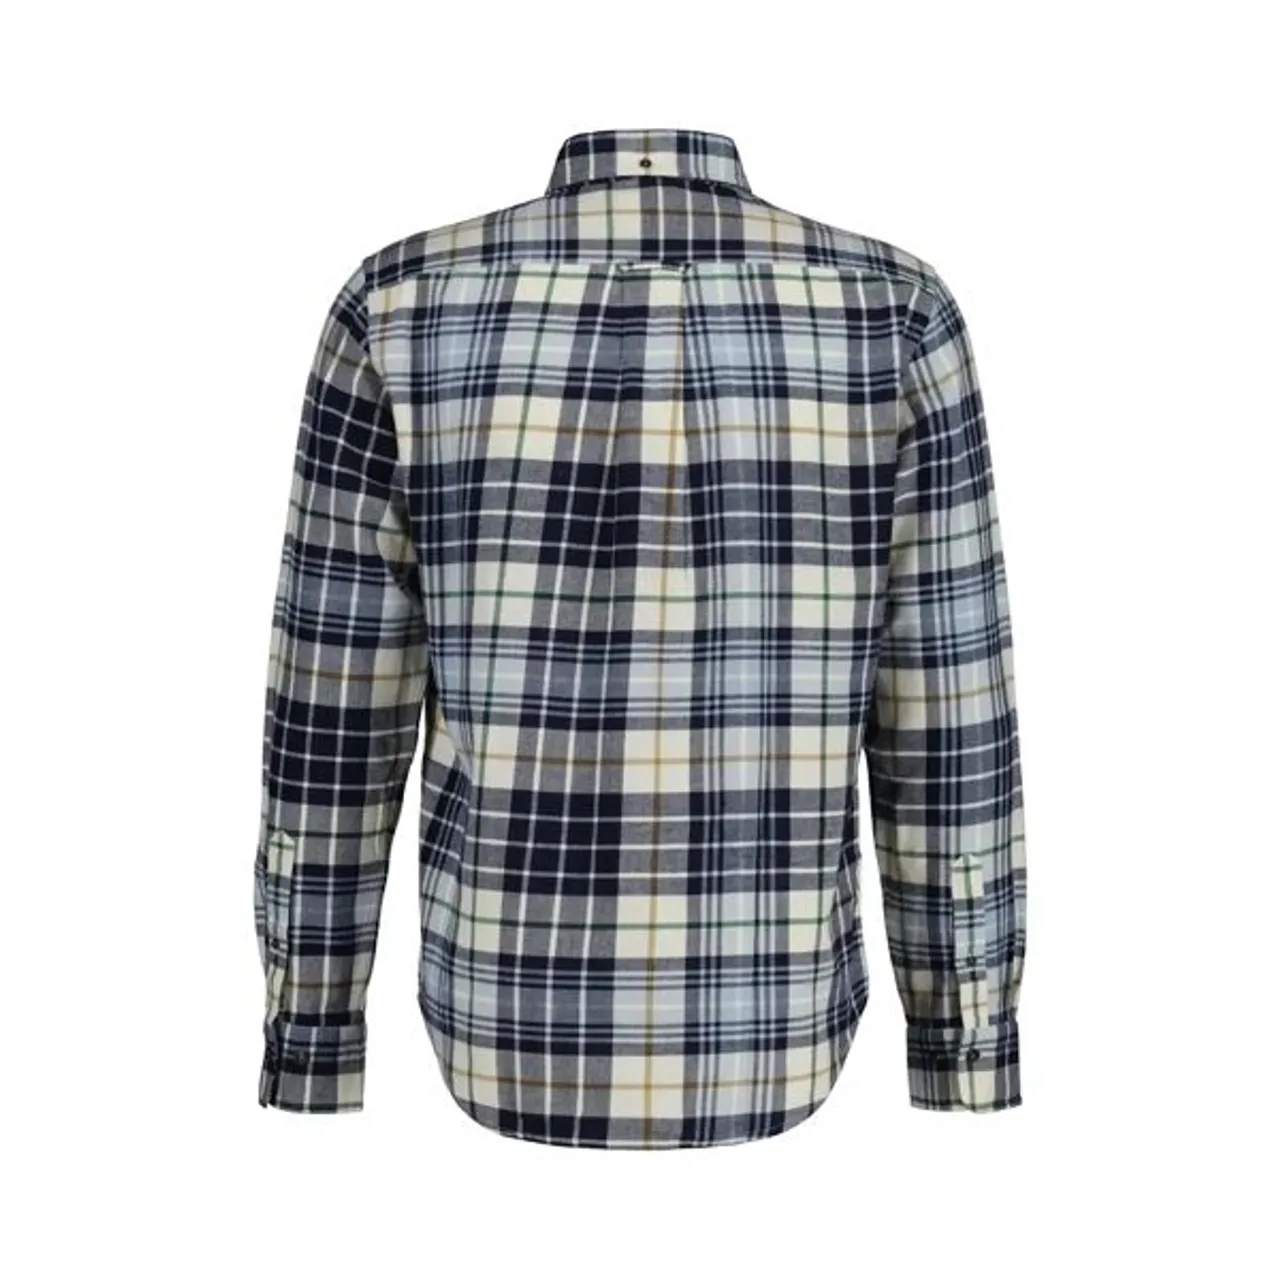 GANT Brushed Cotton Flannel Checked Shirt, Multi - Multi - Male